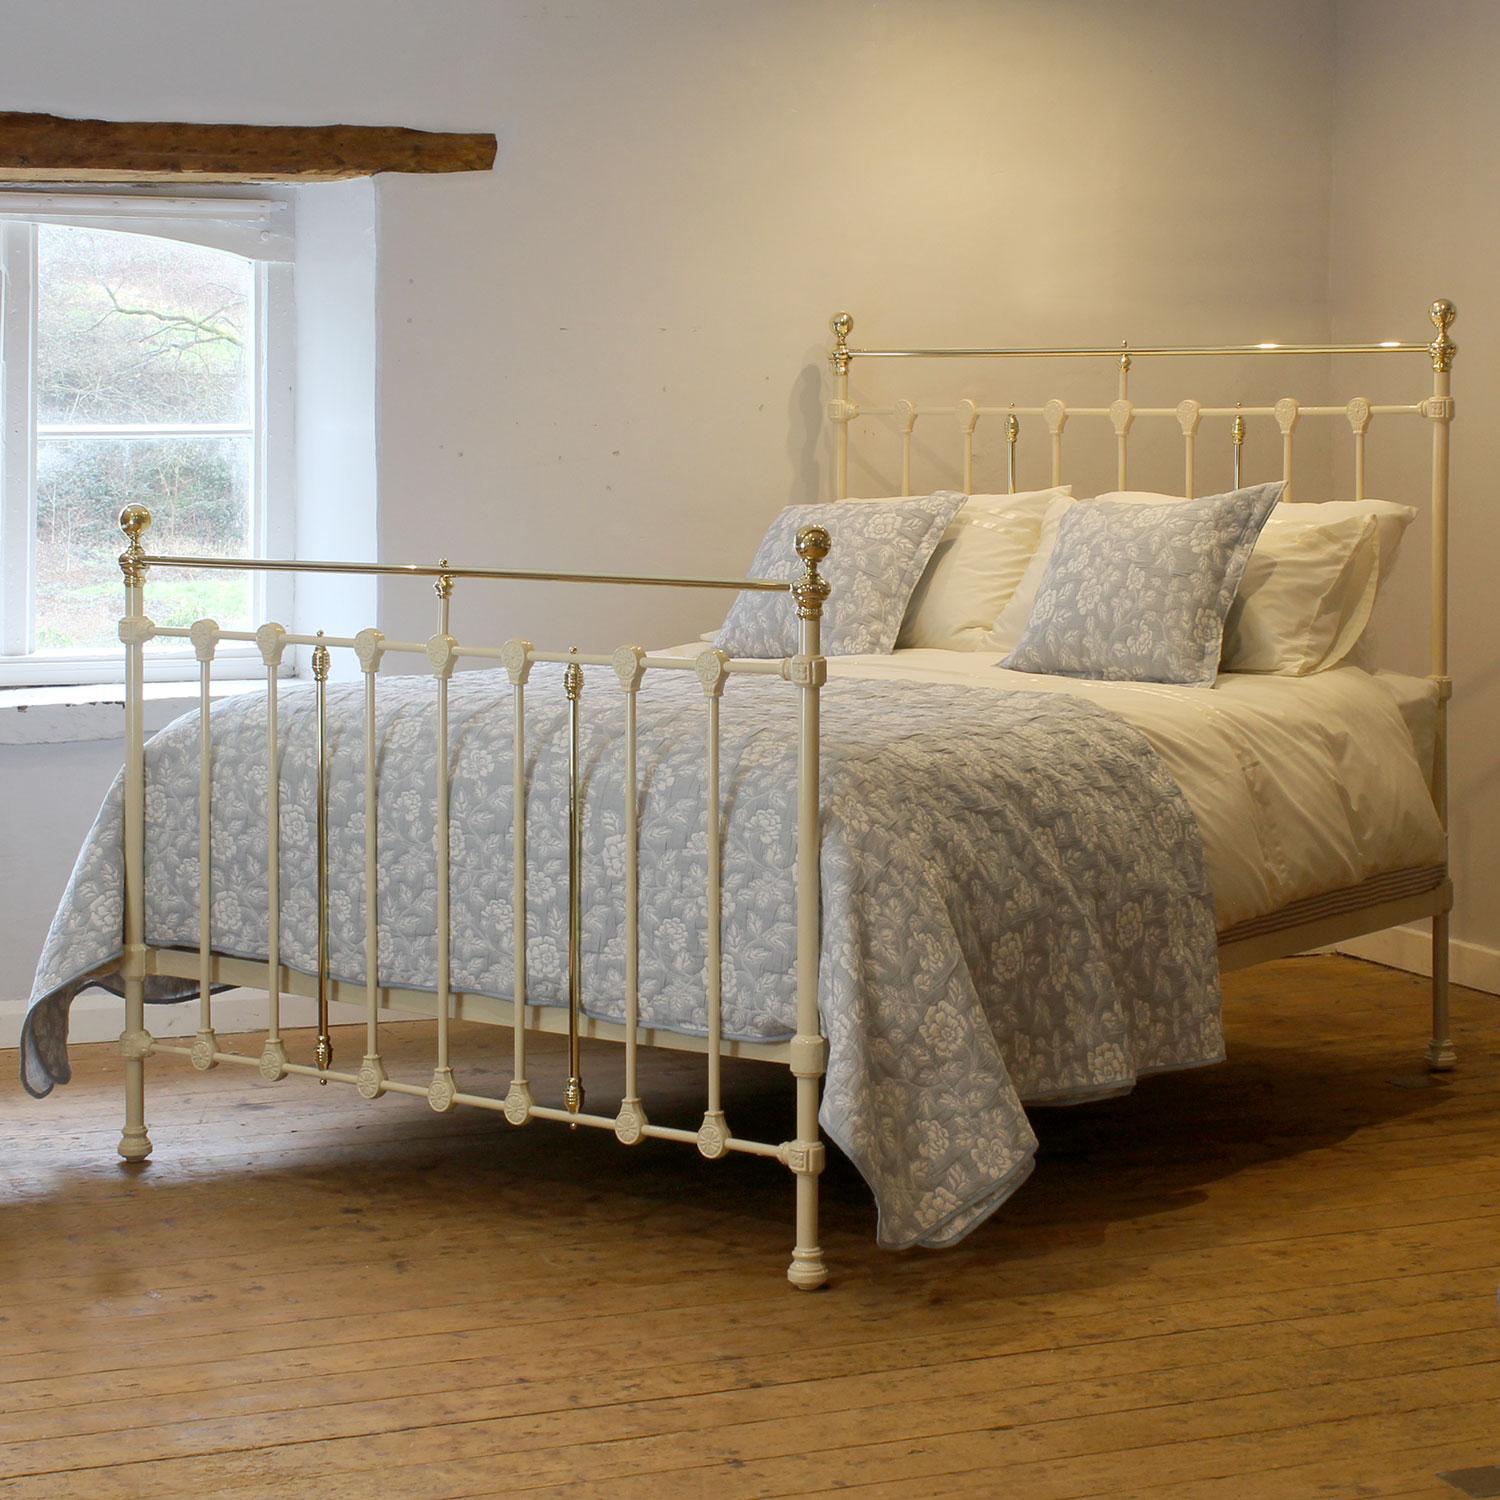 An attractive cast iron antique bed finished in cream with straight brass top rails and decorative castings depicting sun designs.

This bed accepts a UK king size or US queen size (5ft, 60in or 150cm wide) base and mattress set.

The price includes